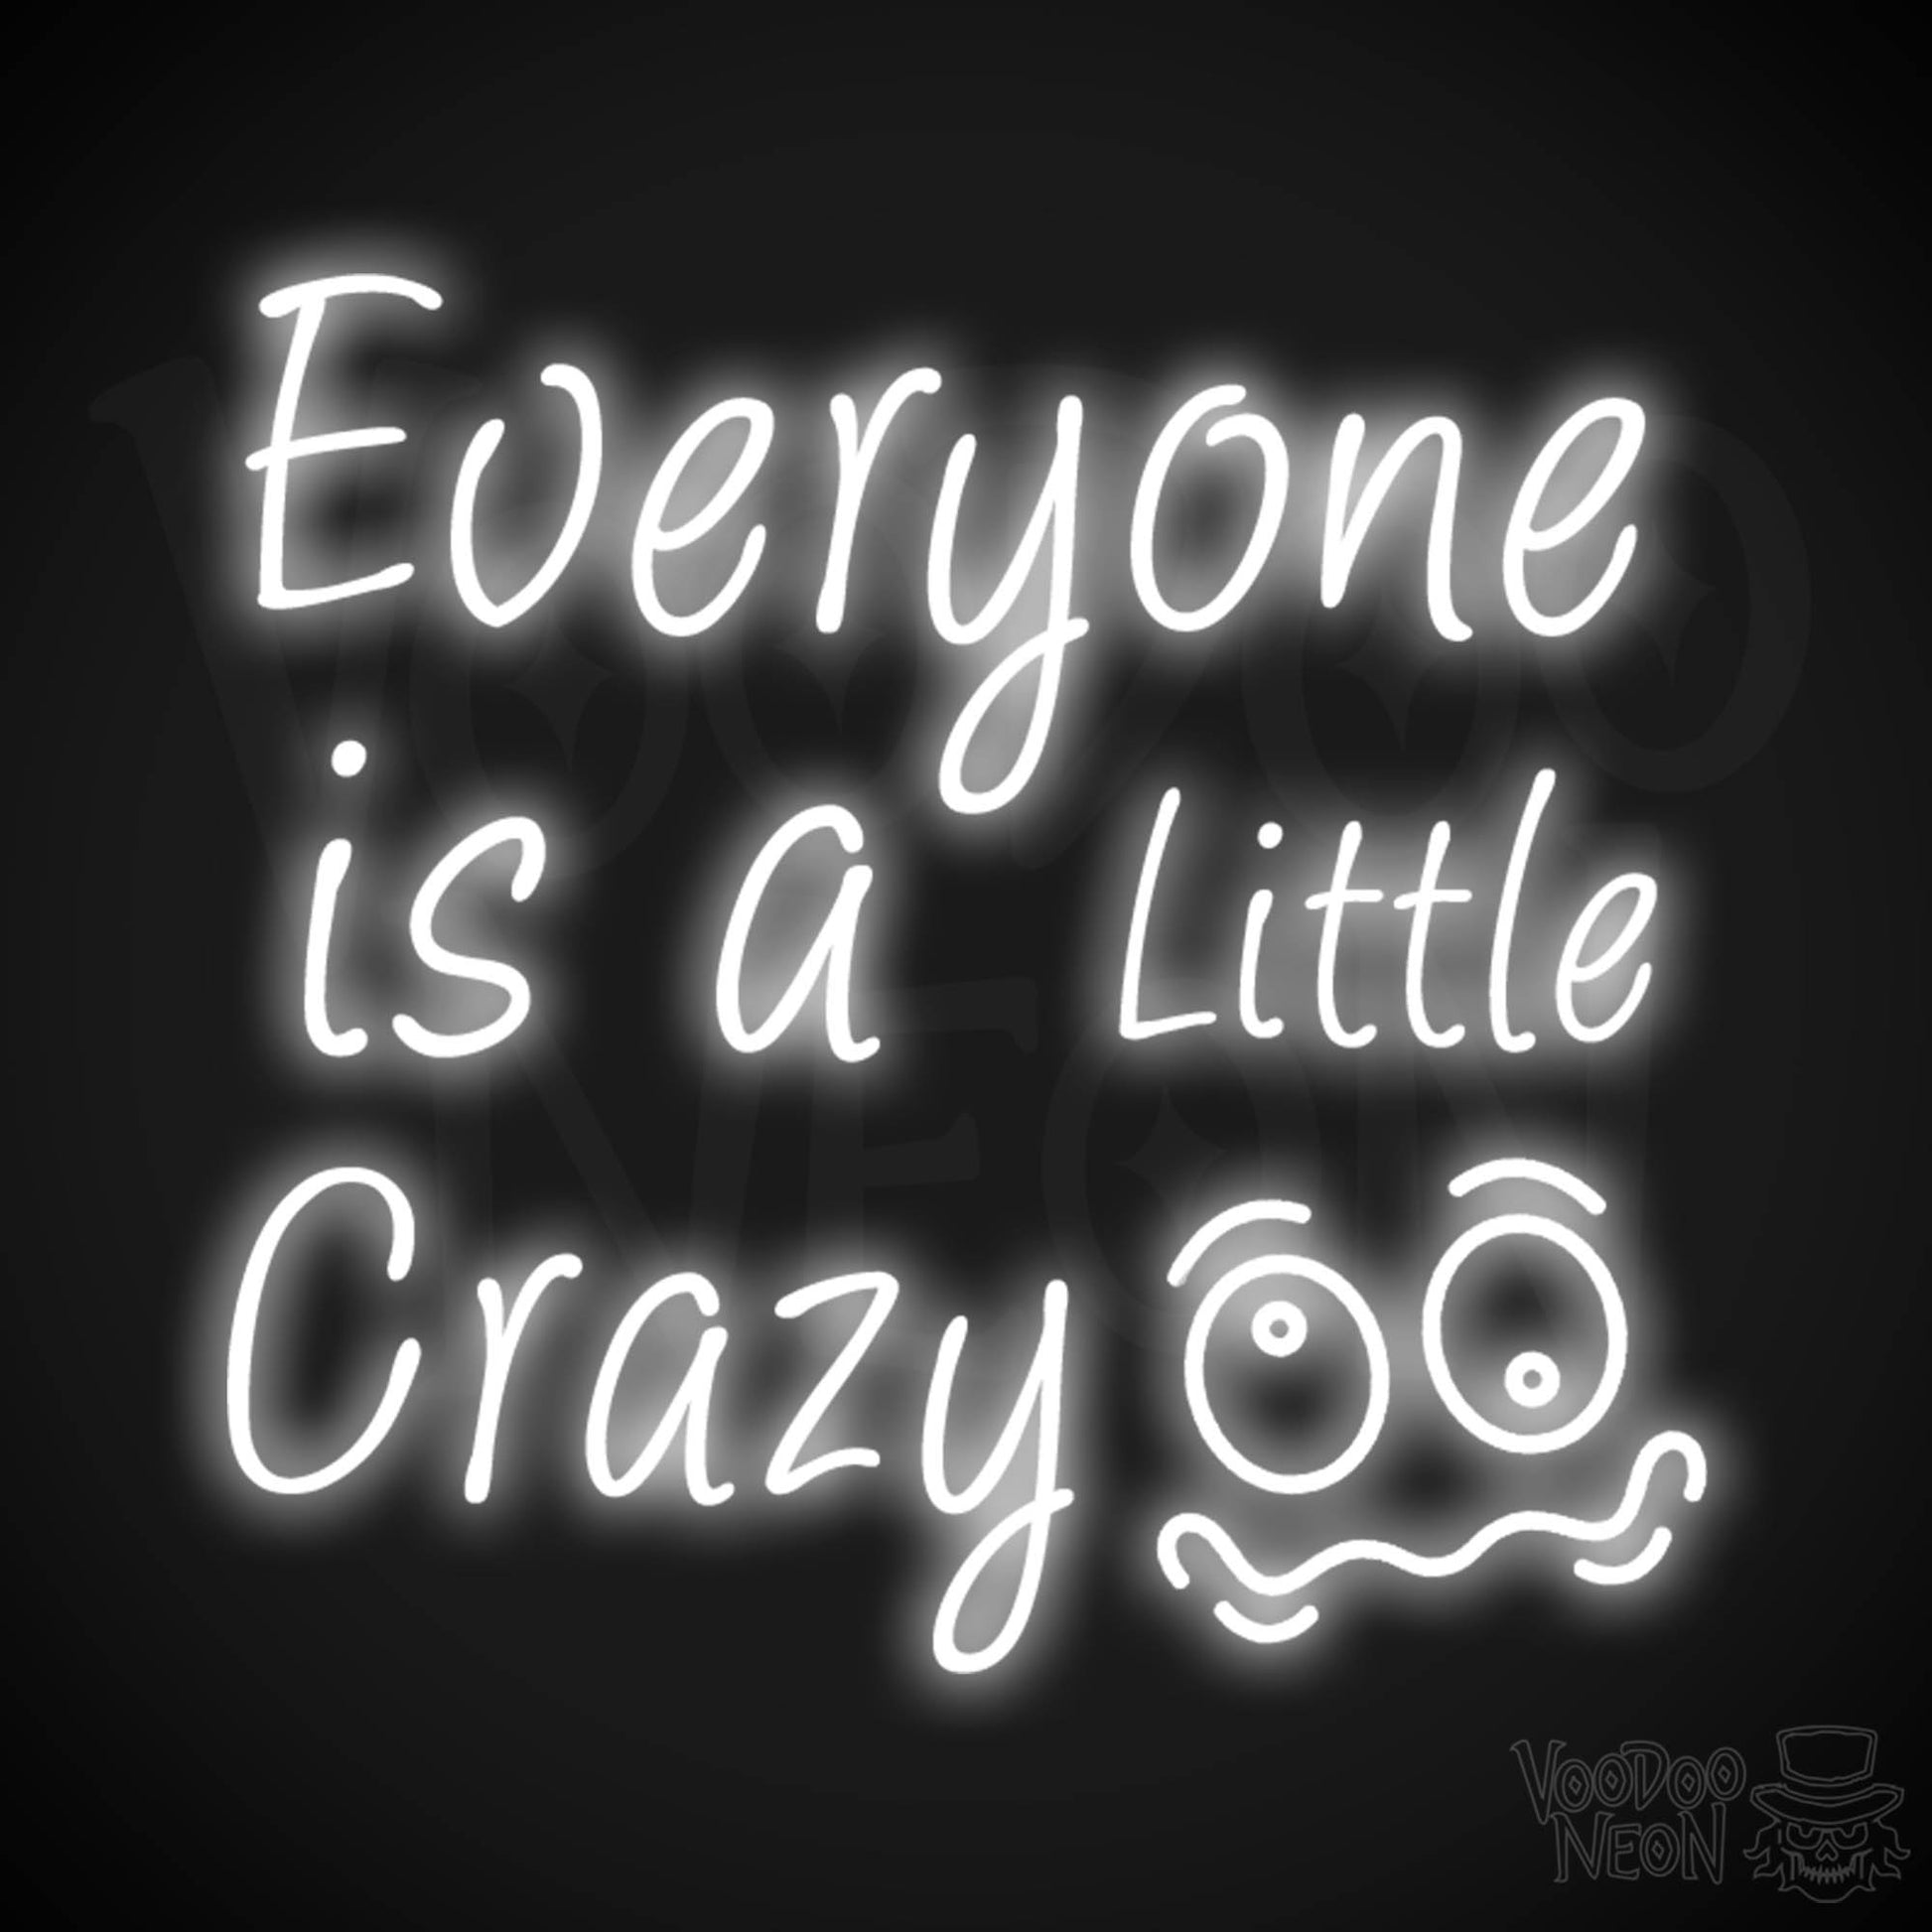 Everyone Is A Little Crazy Neon Sign - Neon Everyone Is A Little Crazy Sign - Color White